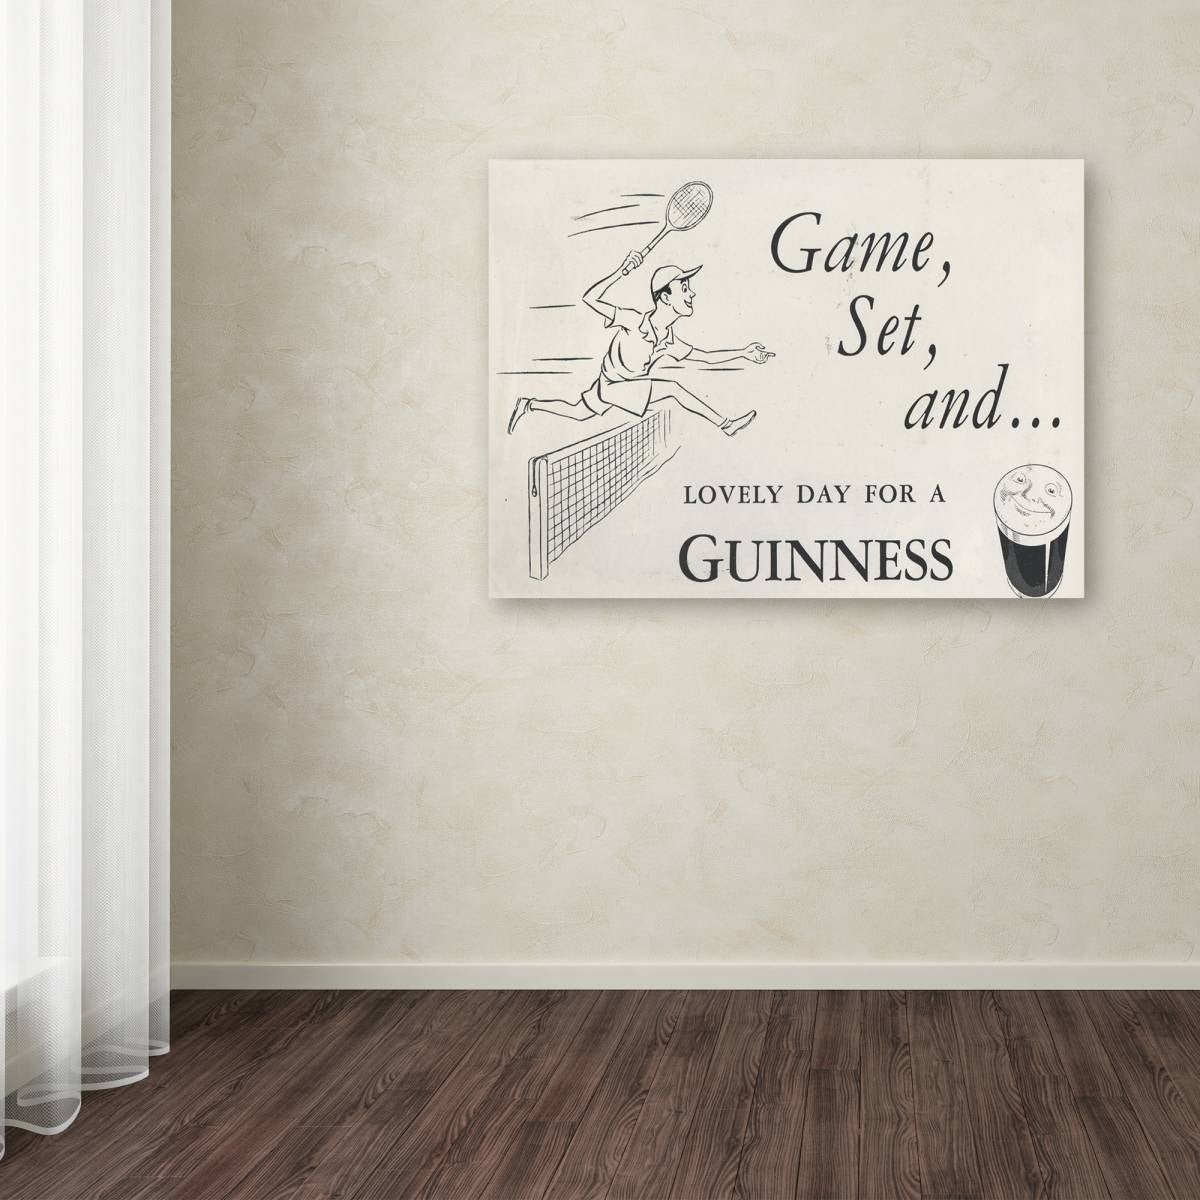 Game lovers will absolutely adore this Guinness Brewery 'Lovely Day For A Guinness VI' canvas print. Featuring the iconic Guinness brand, this wall art piece is perfect for those who appreciate both a good game and a good beer.